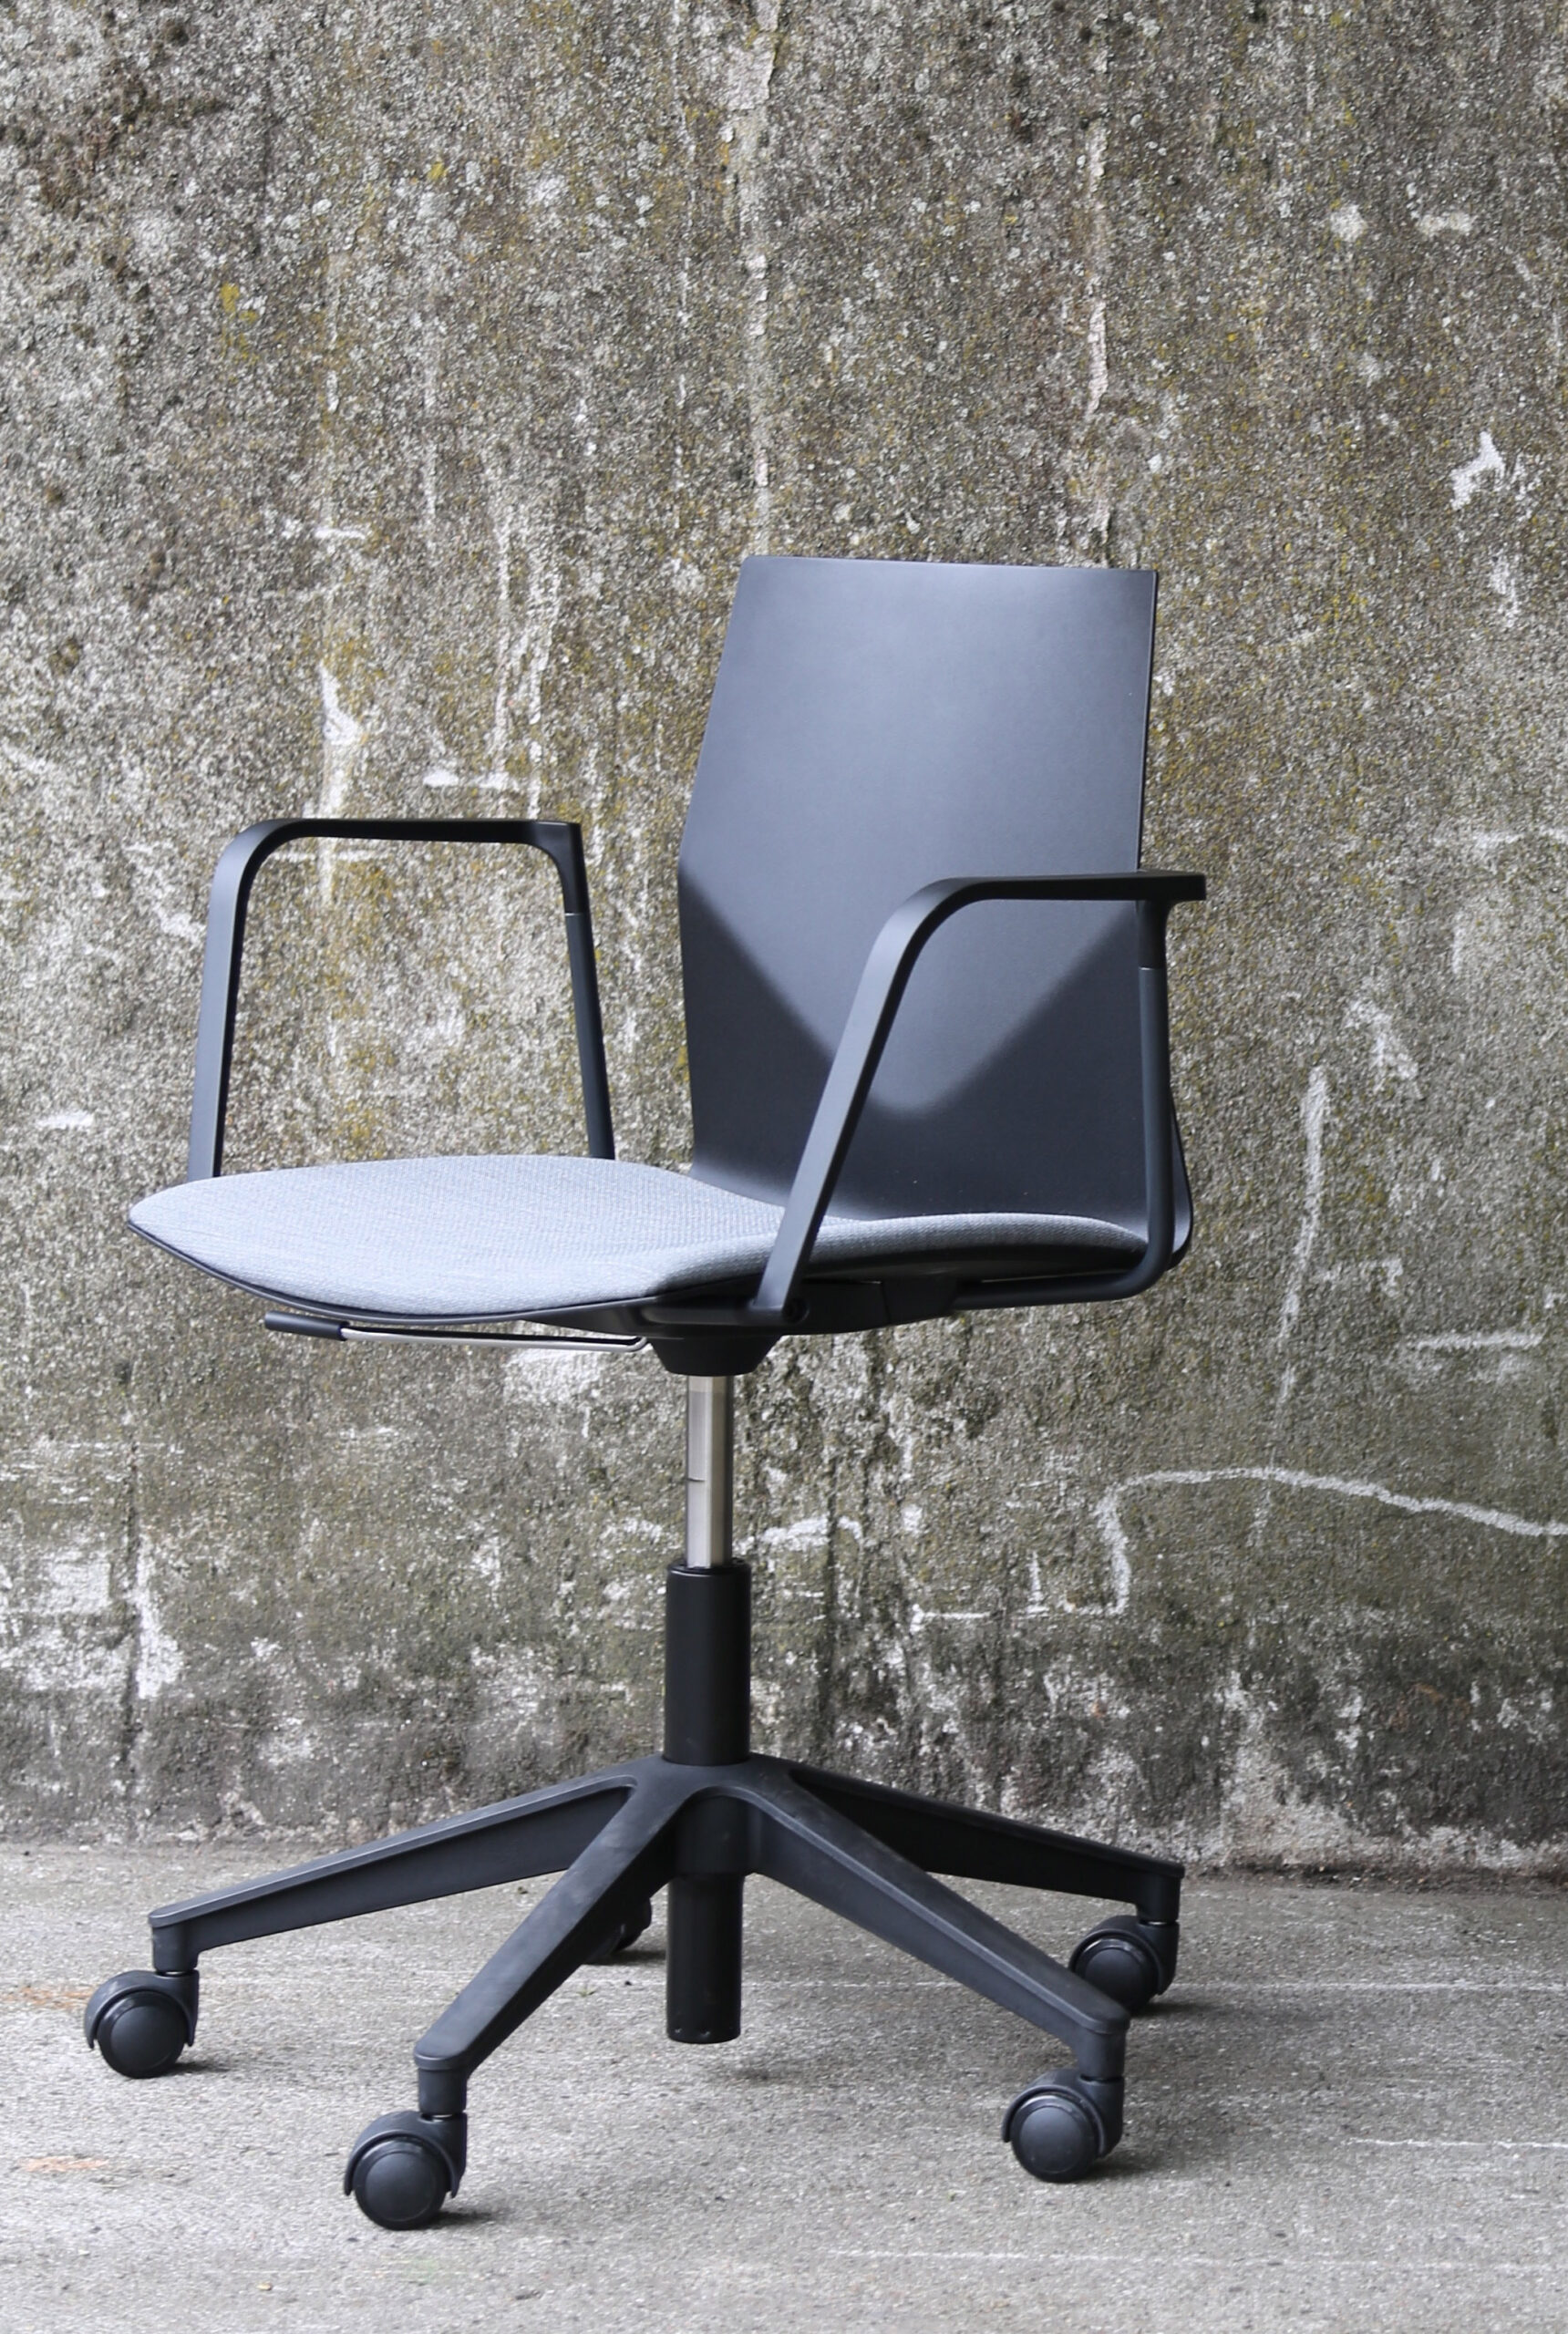 OCEE&FOUR – Chairs – FourCast 2 Wheeler – Lifestyle Image 4